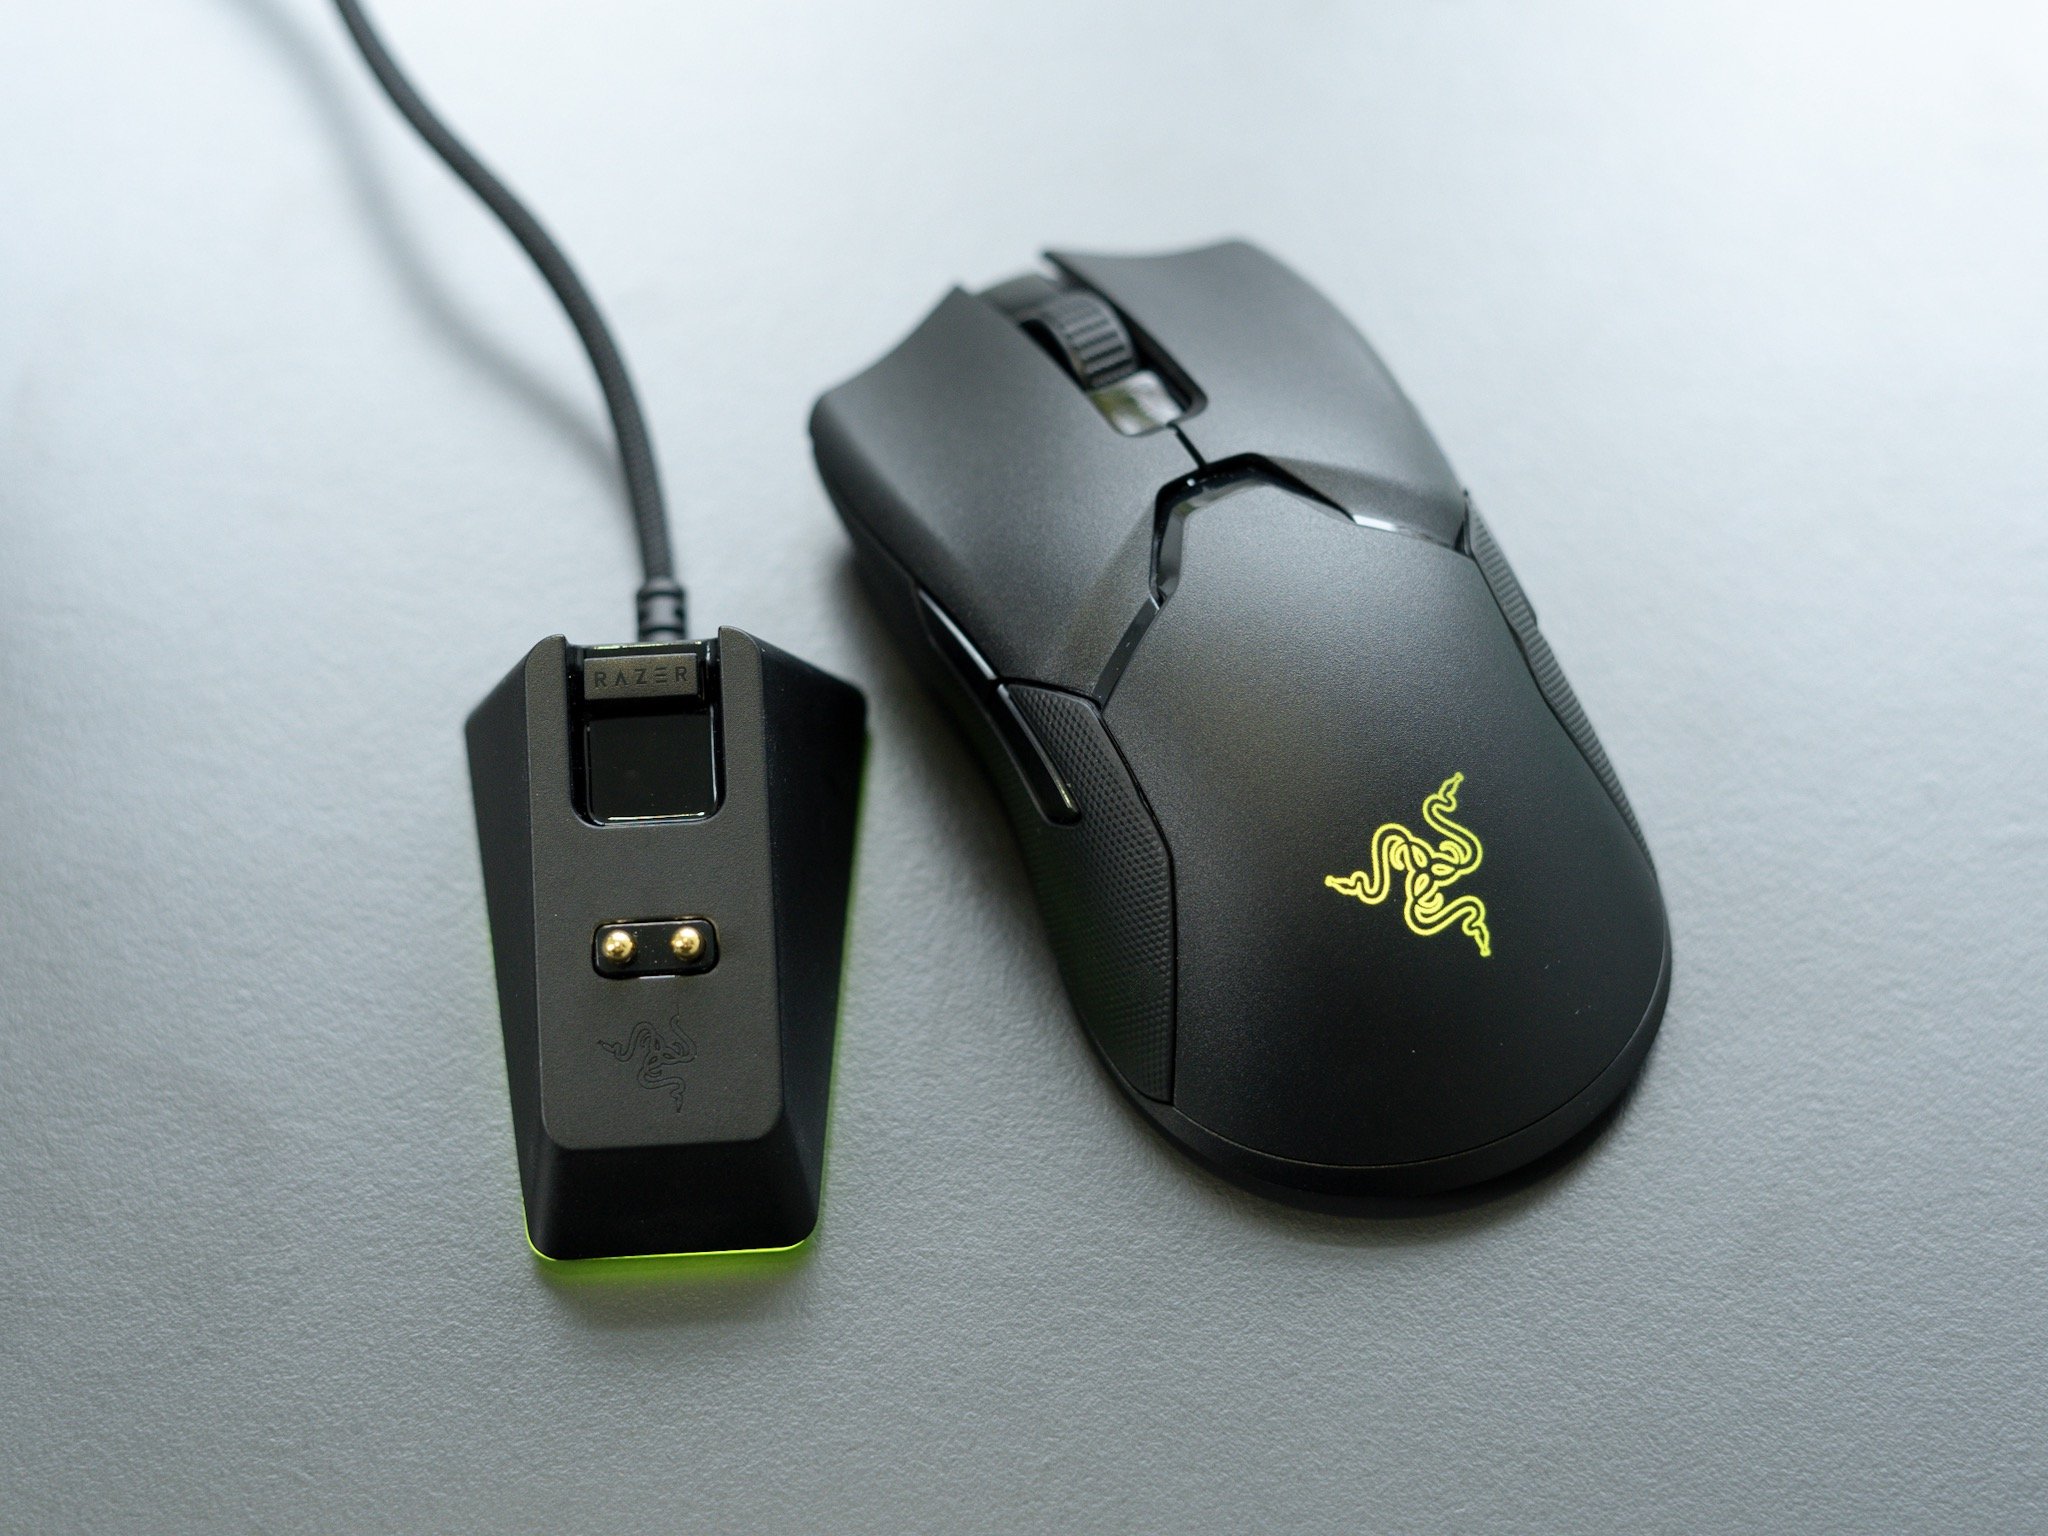 Save And Grab The Razer Viper Ultimate Wireless Mouse With Charging Dock Windows Central